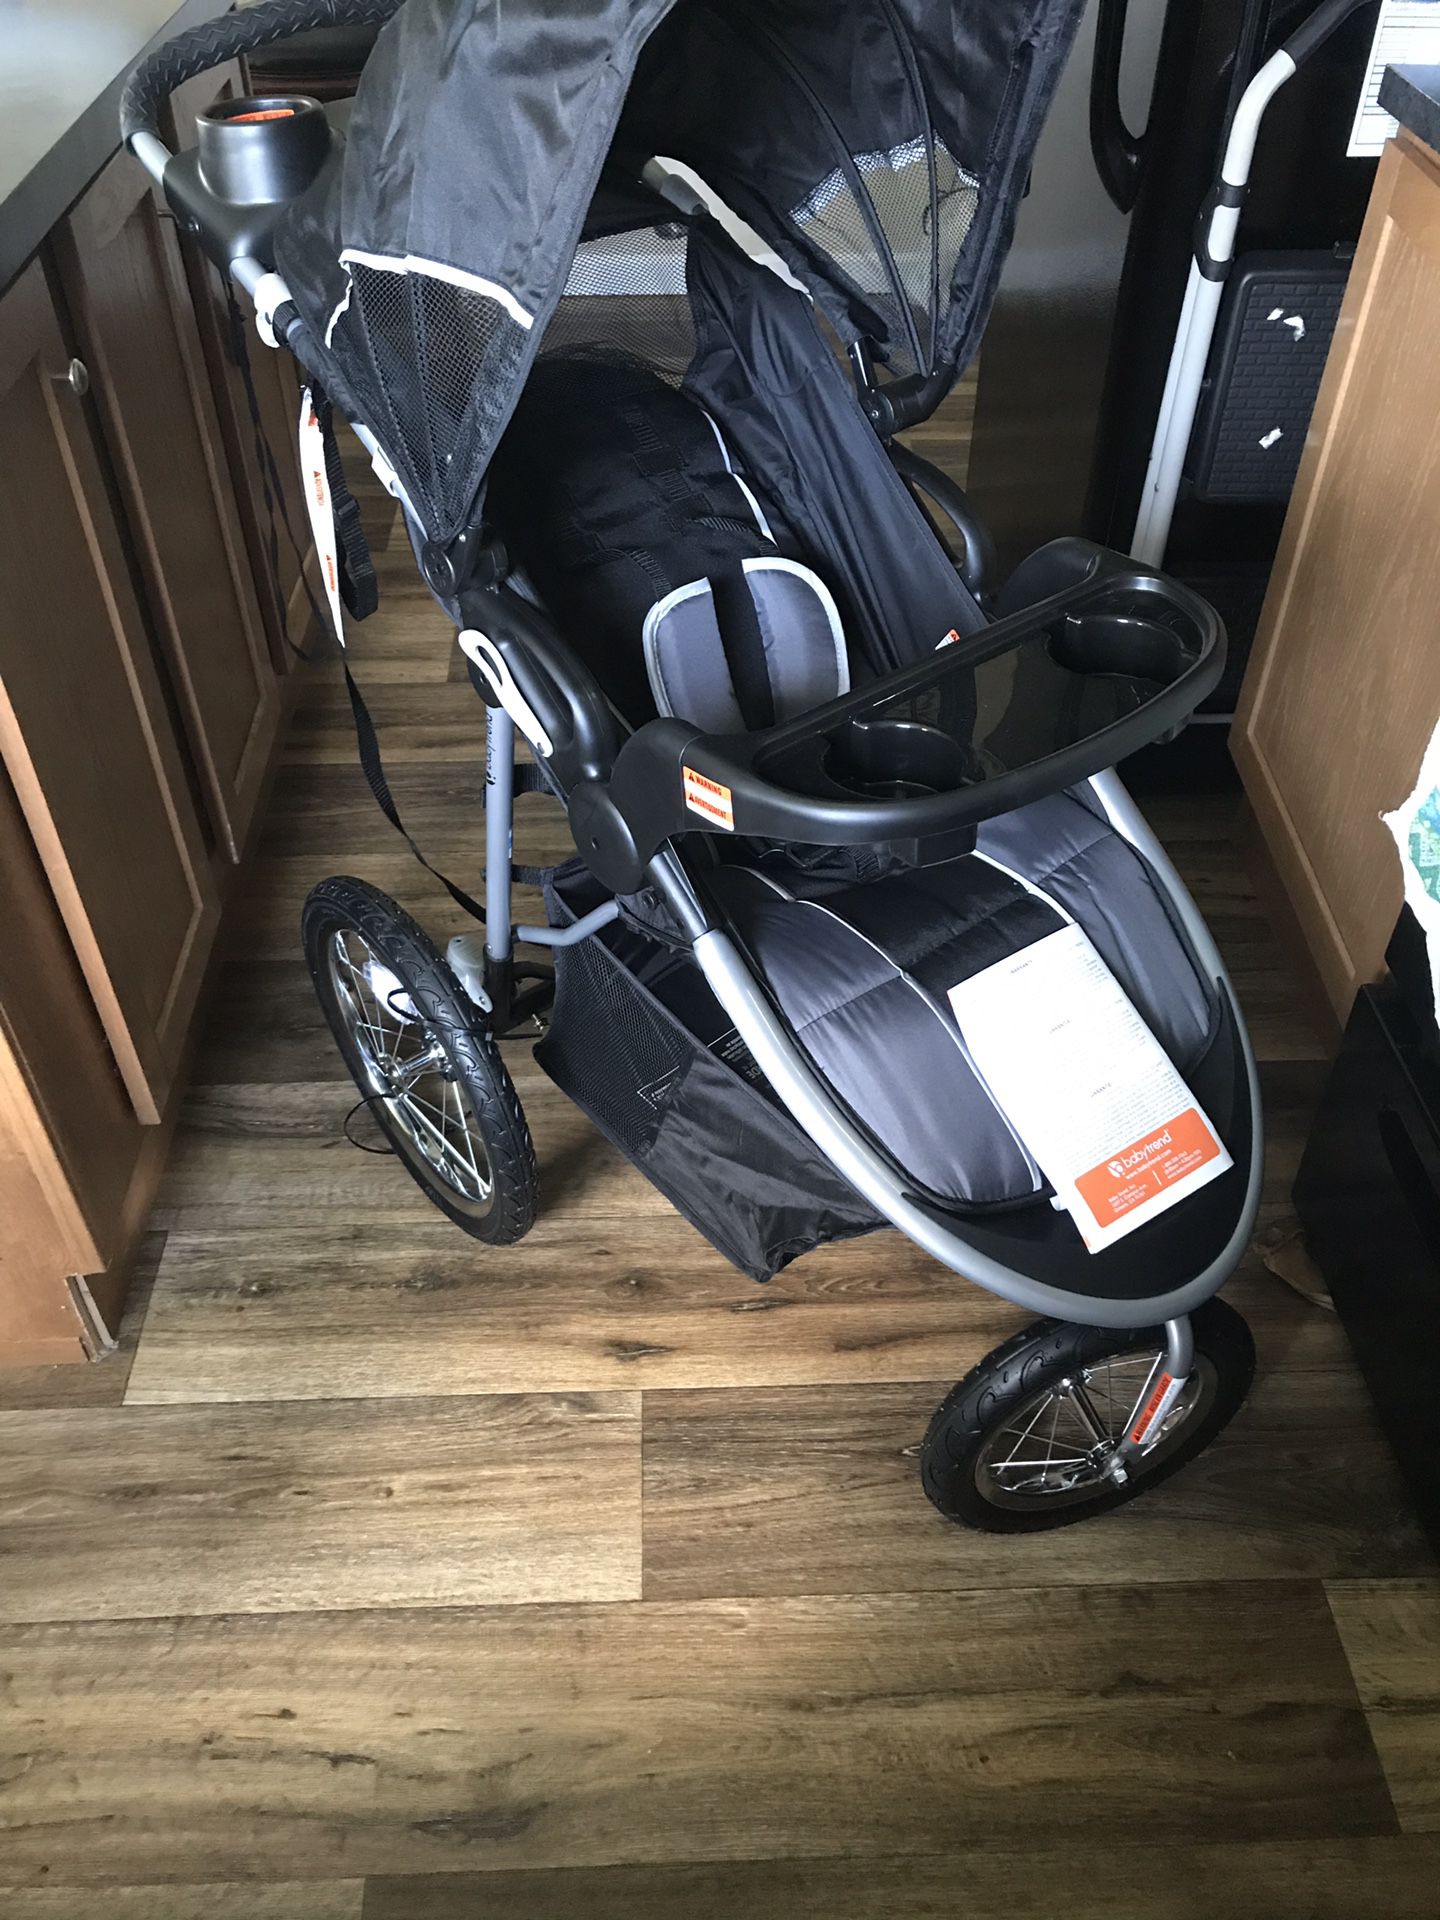 Jogging stroller Baby trend new never used . Make an offer!